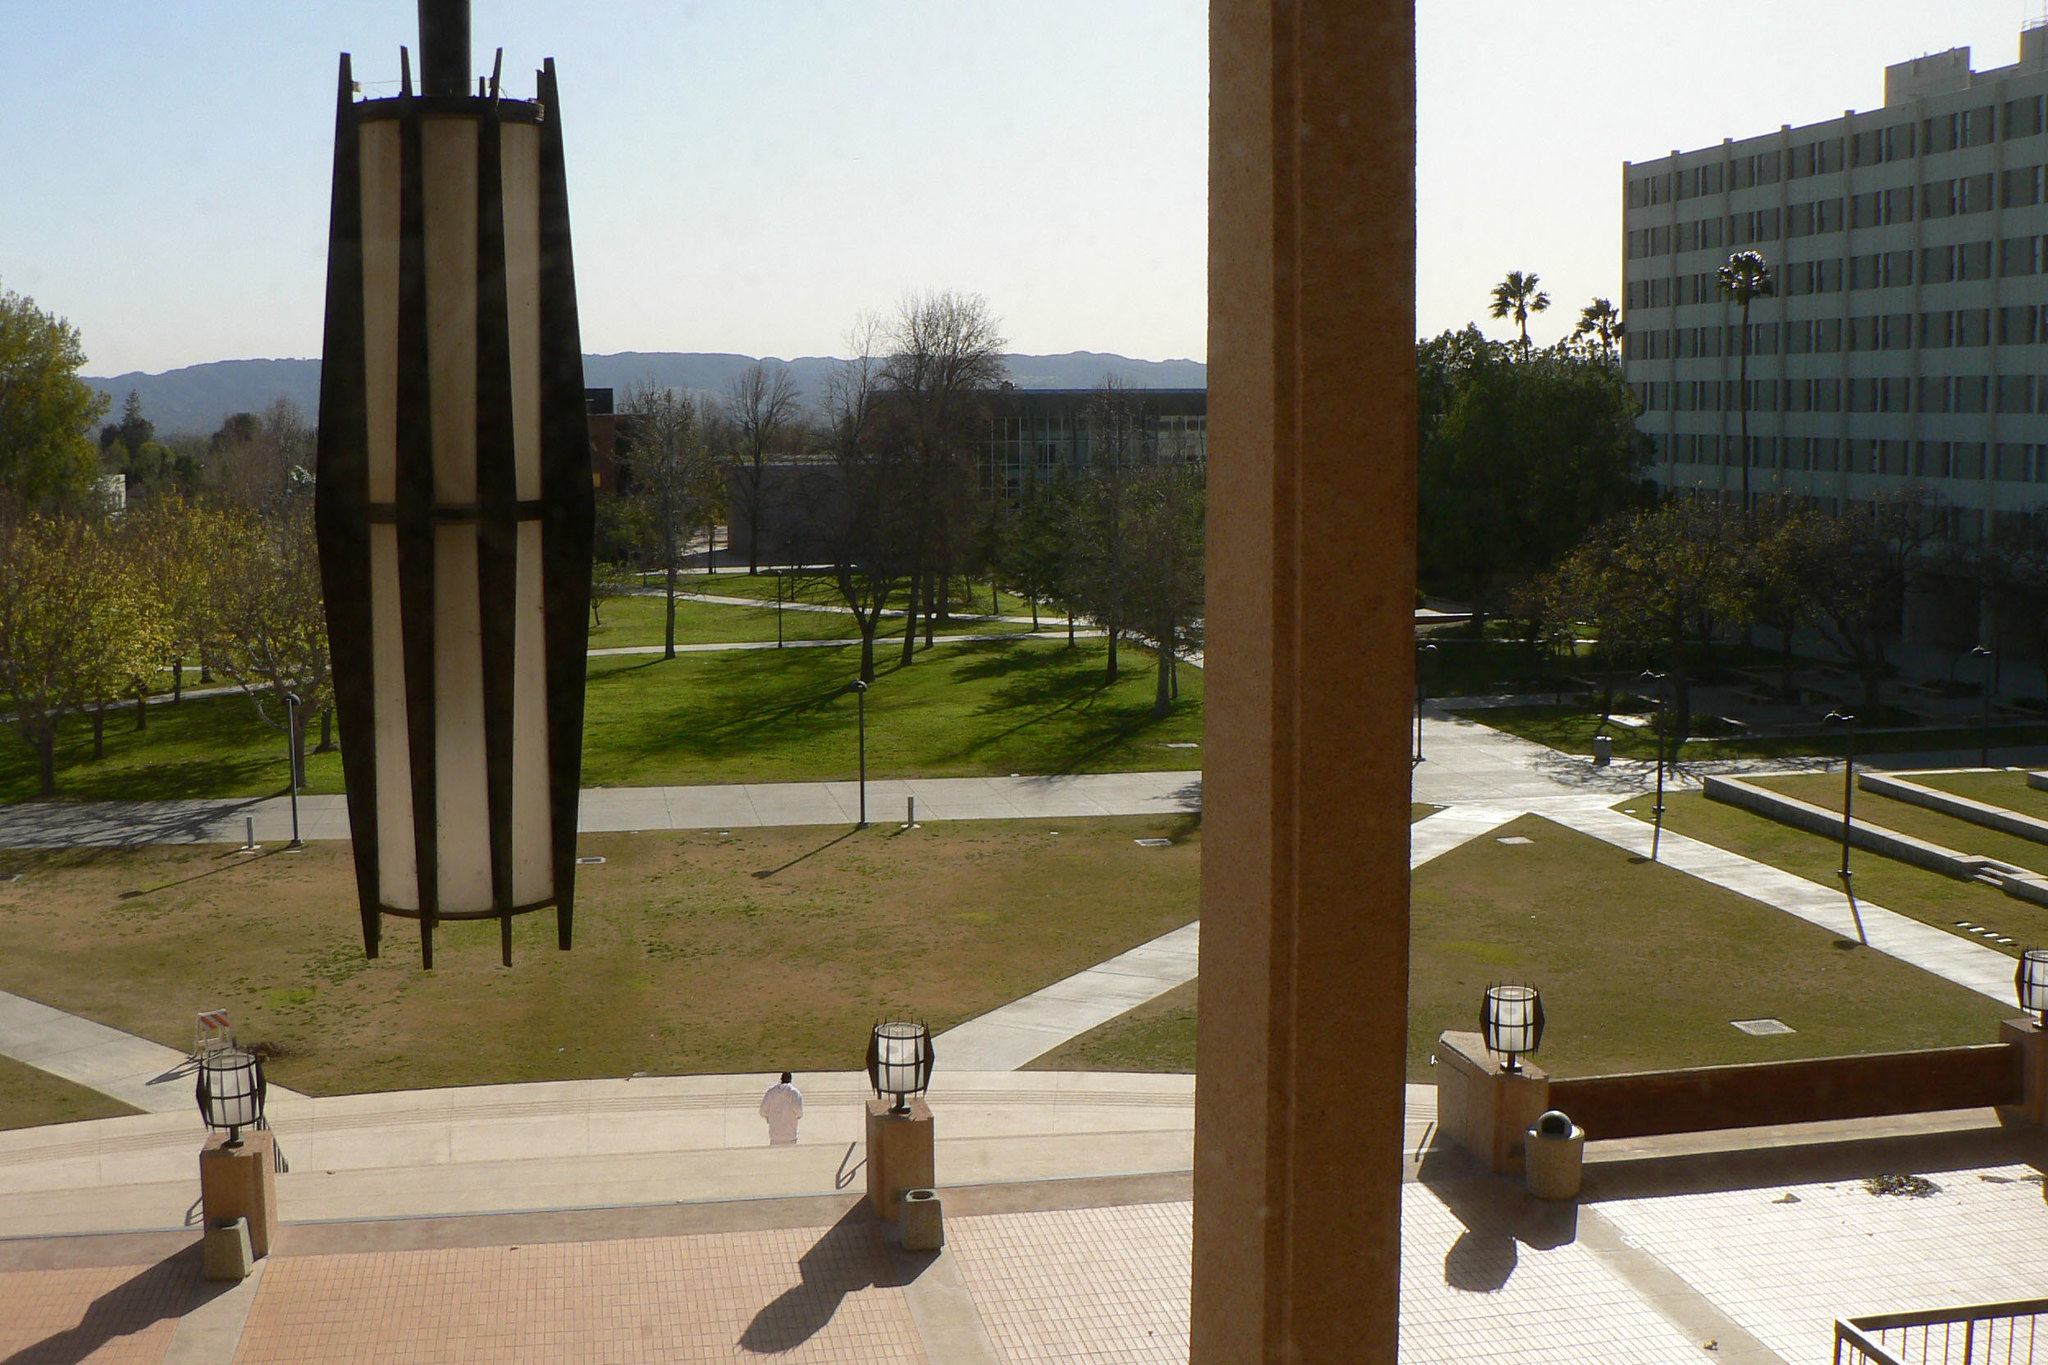 View overlooking the University Library entryway and university lawn, taken from the UL 3rd floor.